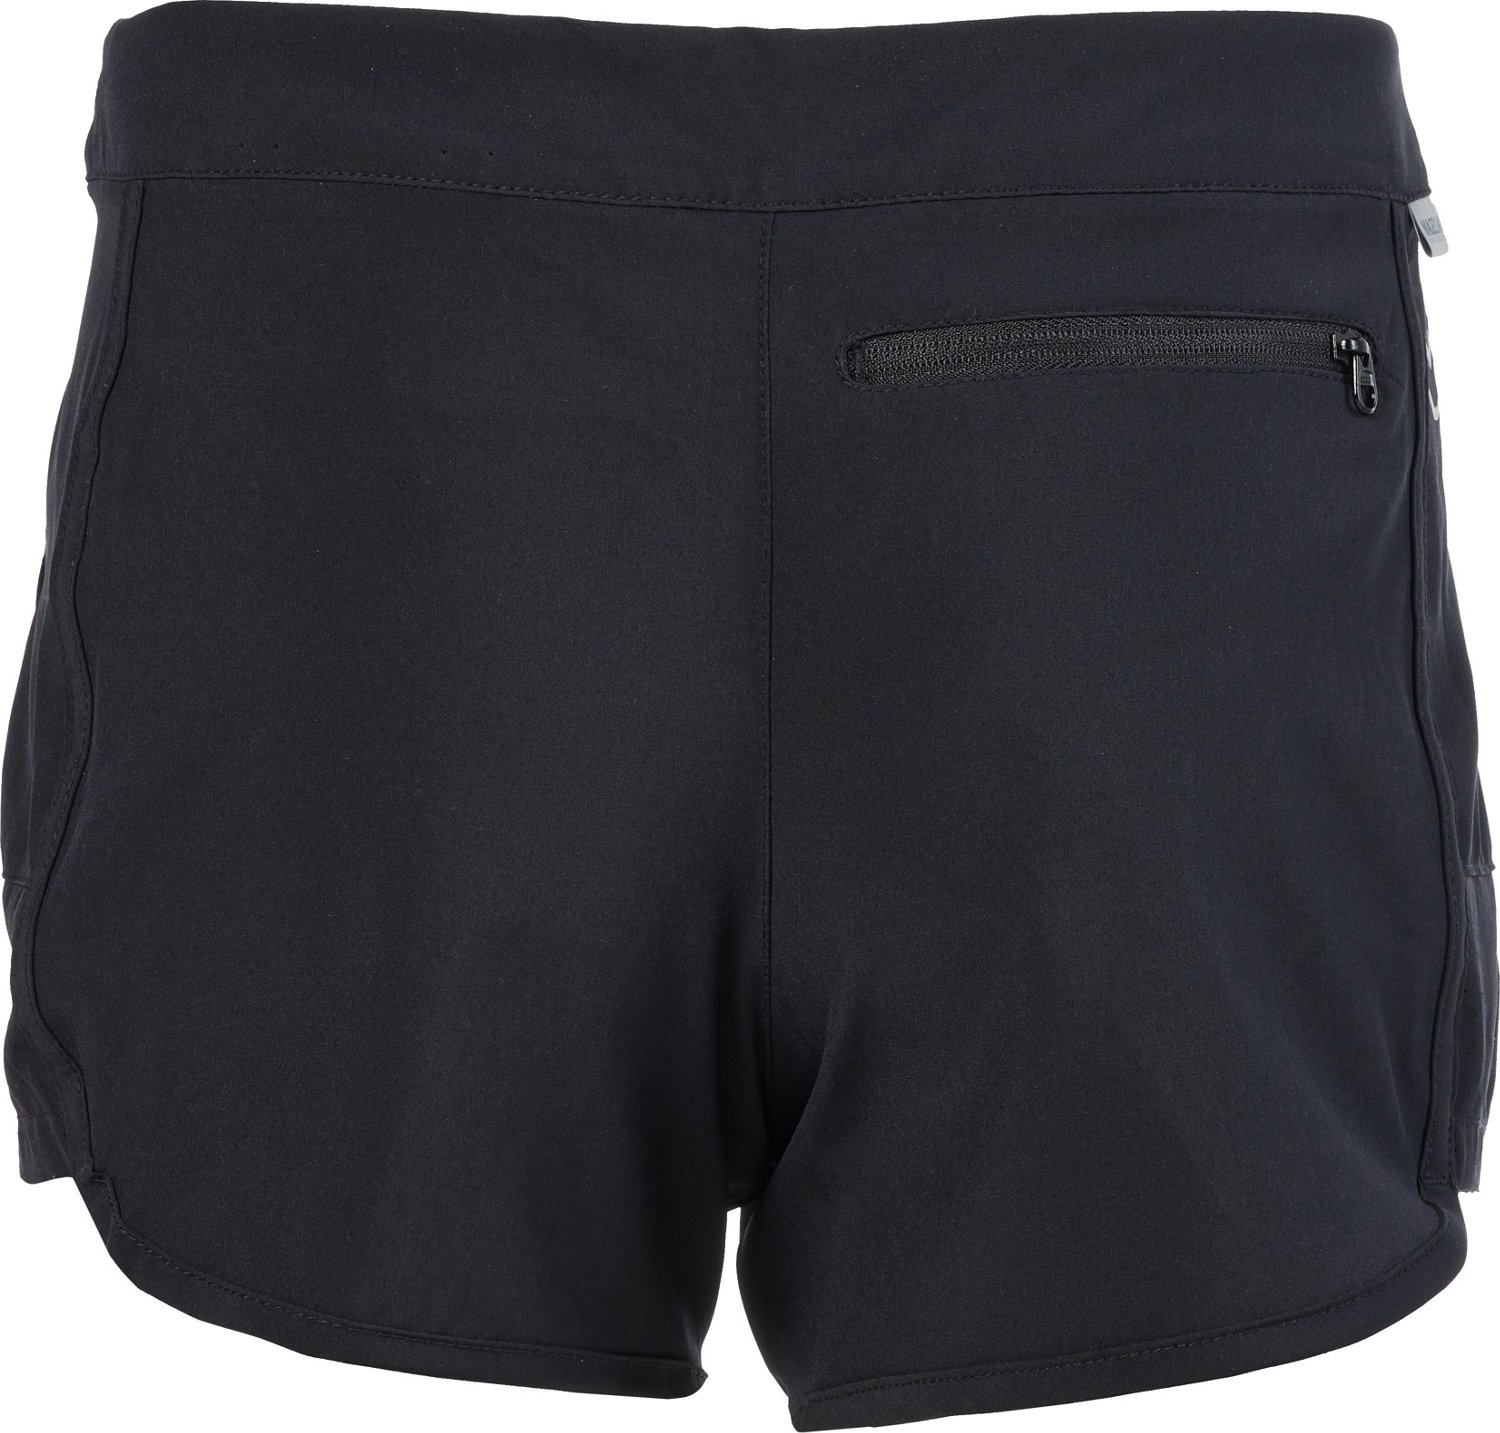 magellan shorts products for sale